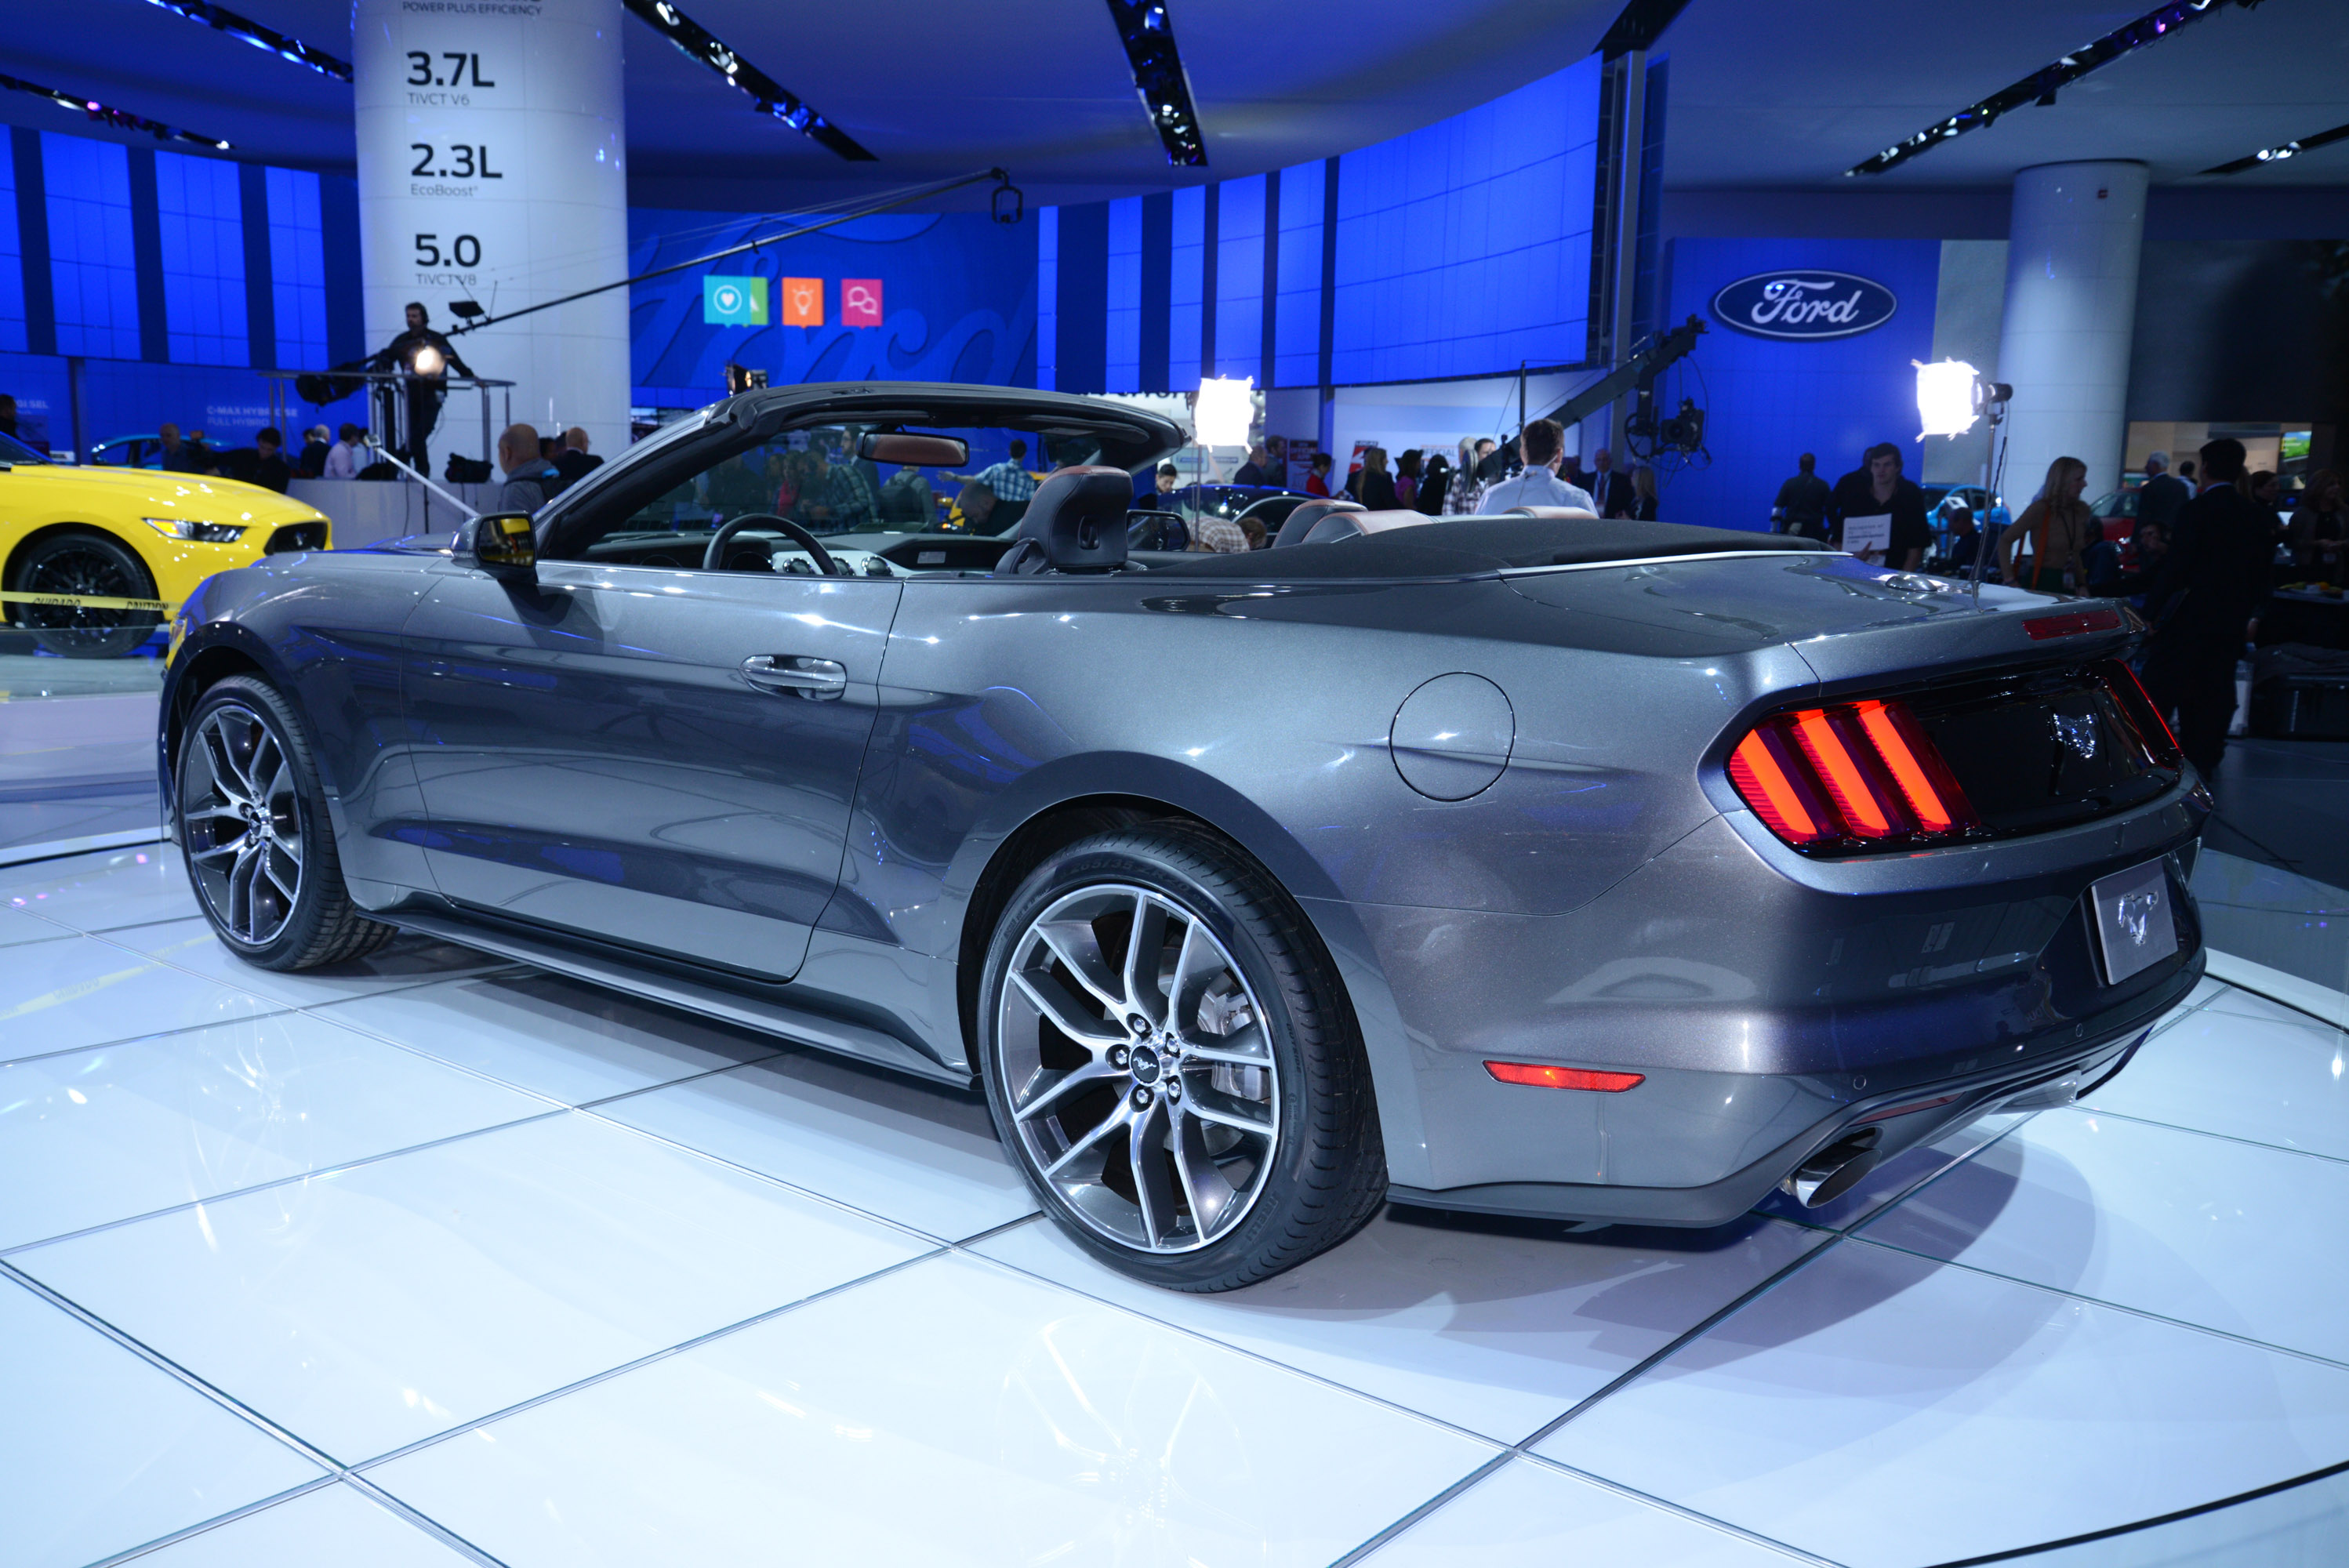 Ford Mustang Convertible Detroit